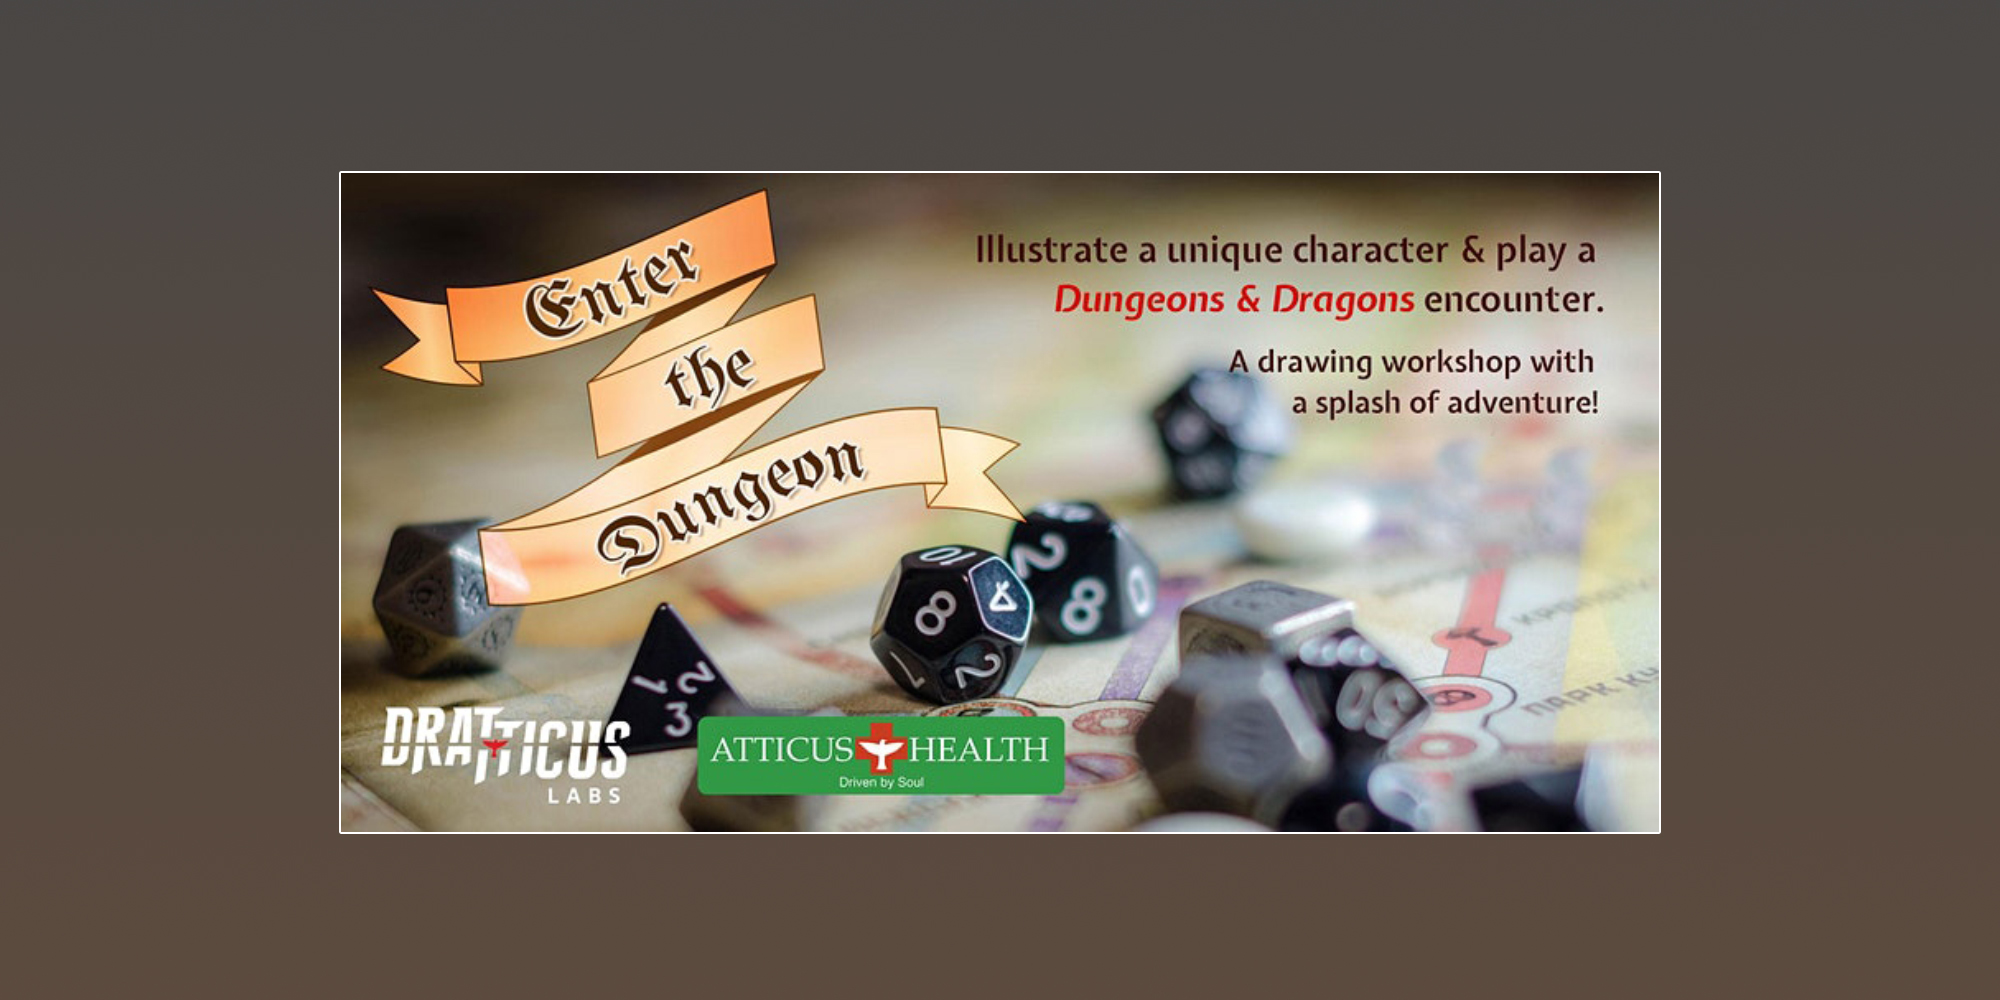 Two Upcoming DnD Drawing Workshops at Dratticus Labs